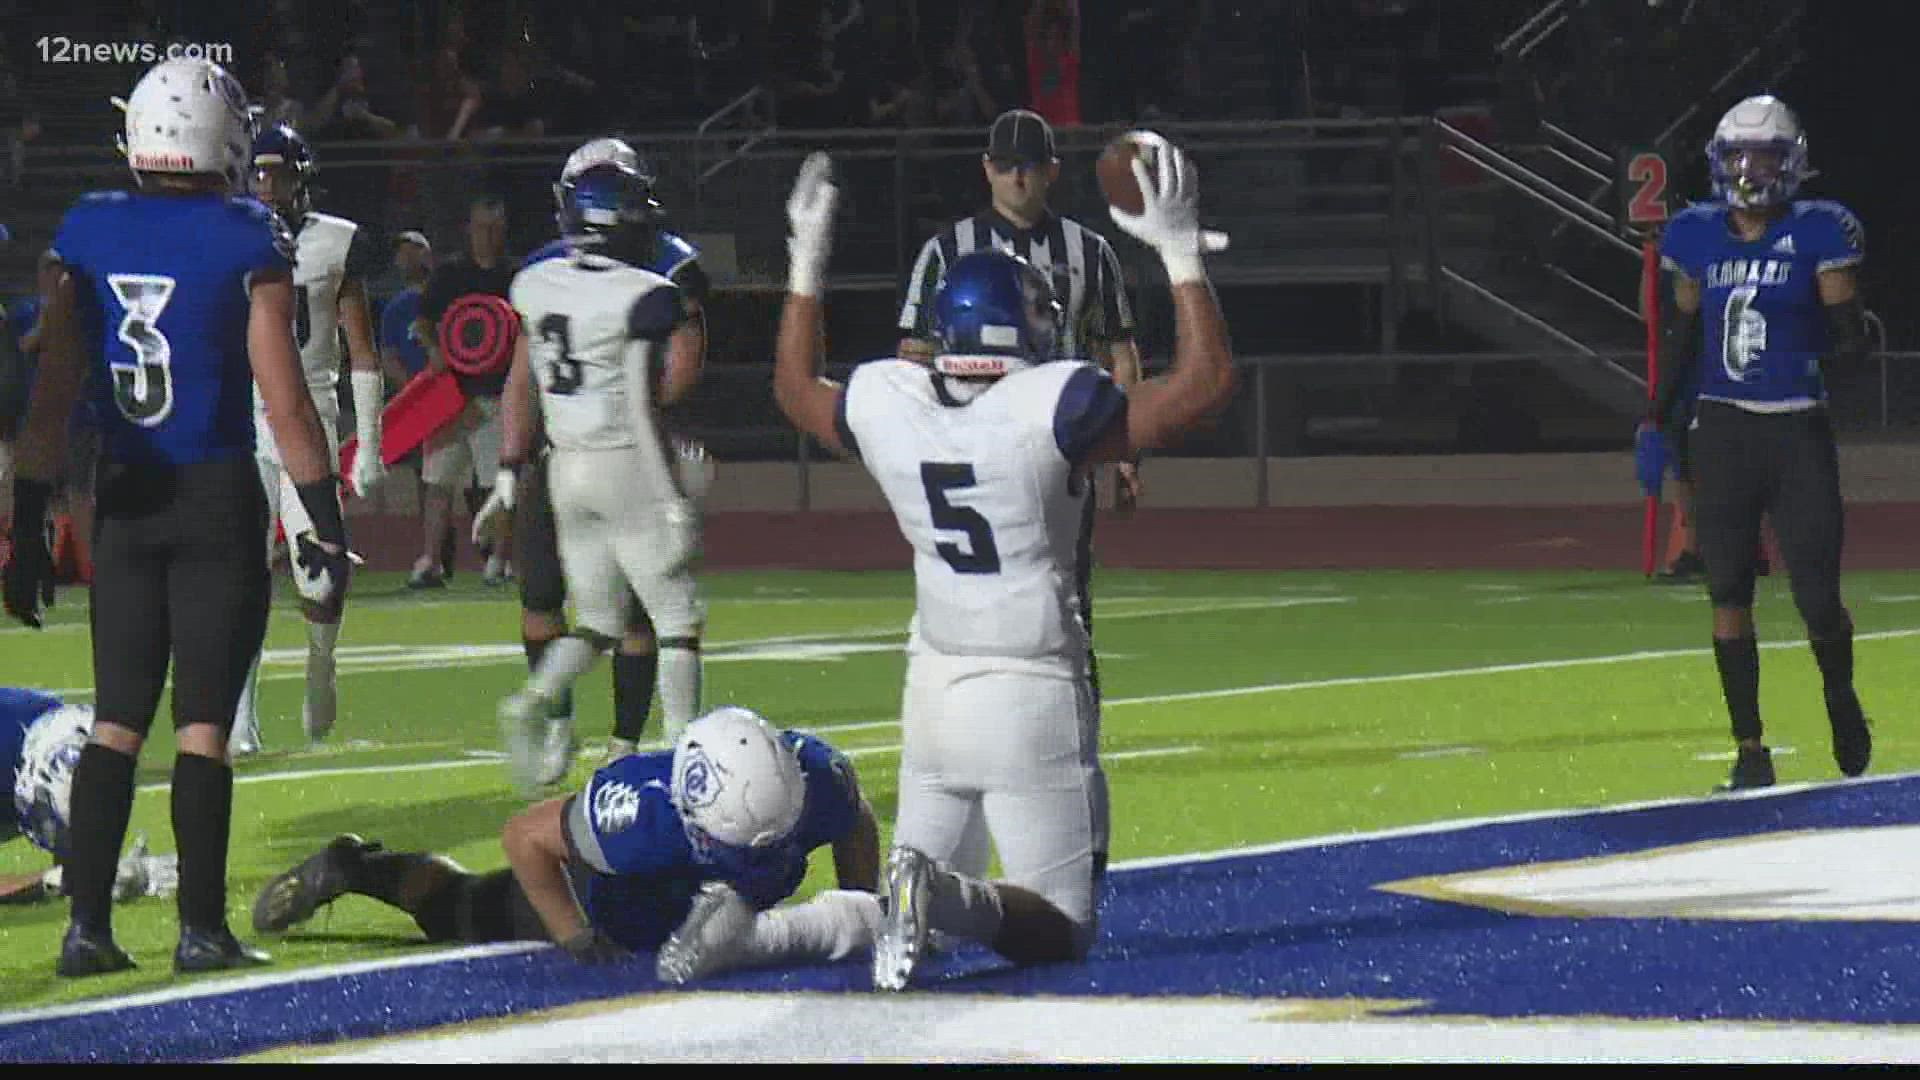 Chandler found their grove and defeated the O'Connor, 36-1.